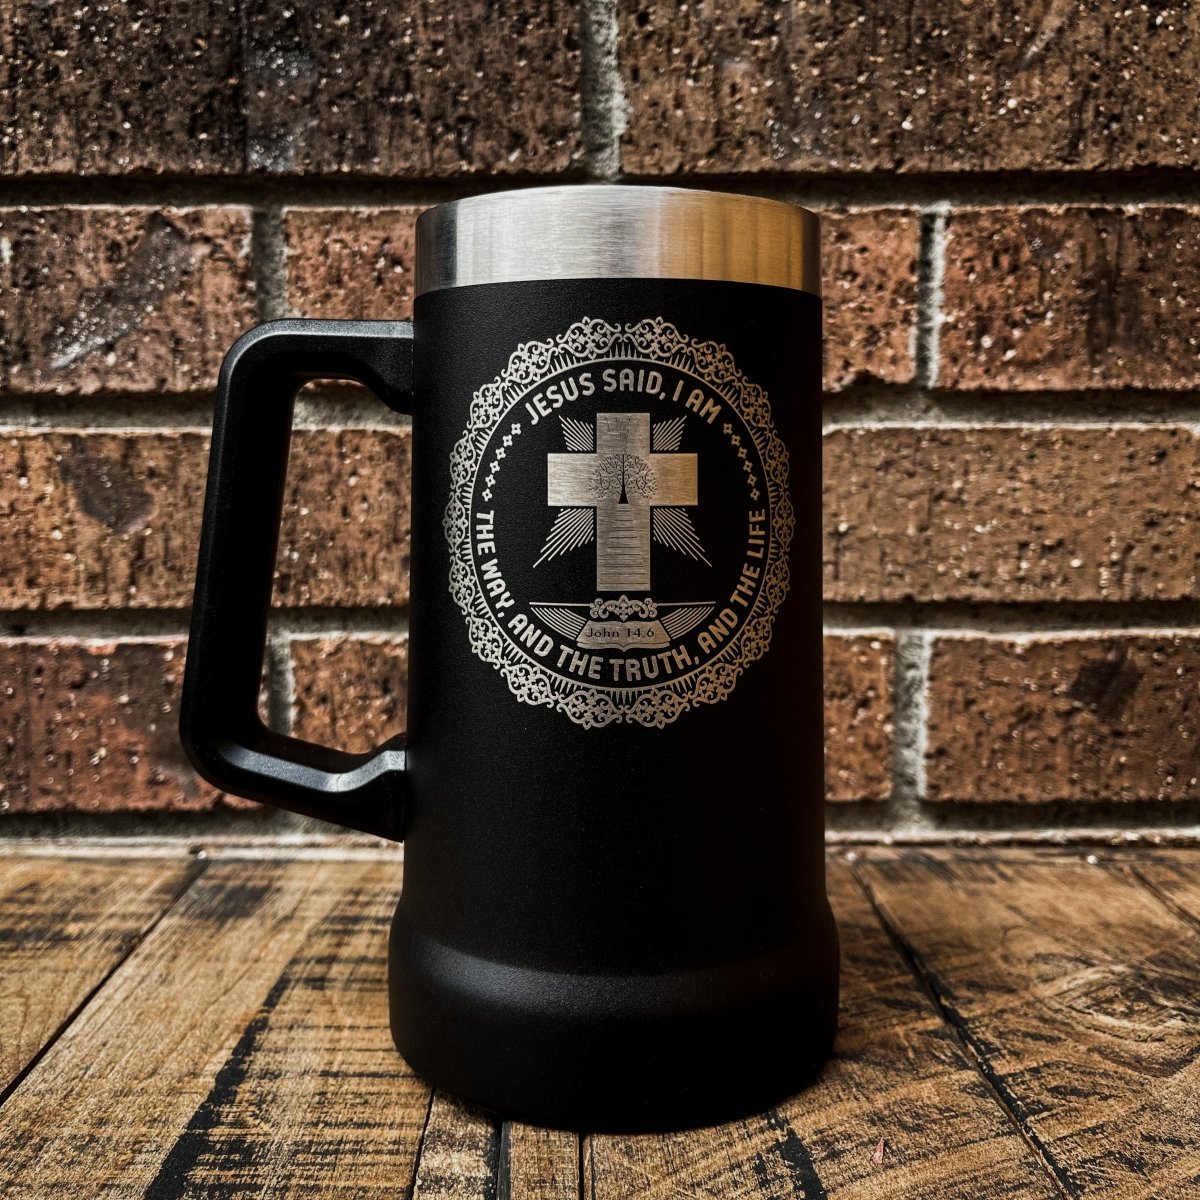 24oz Stein - I AM: The Way, and The Truth, and The Life - 24oz Stein - The Reformed Sage - #reformed# - #reformed_gifts# - #christian_gifts#